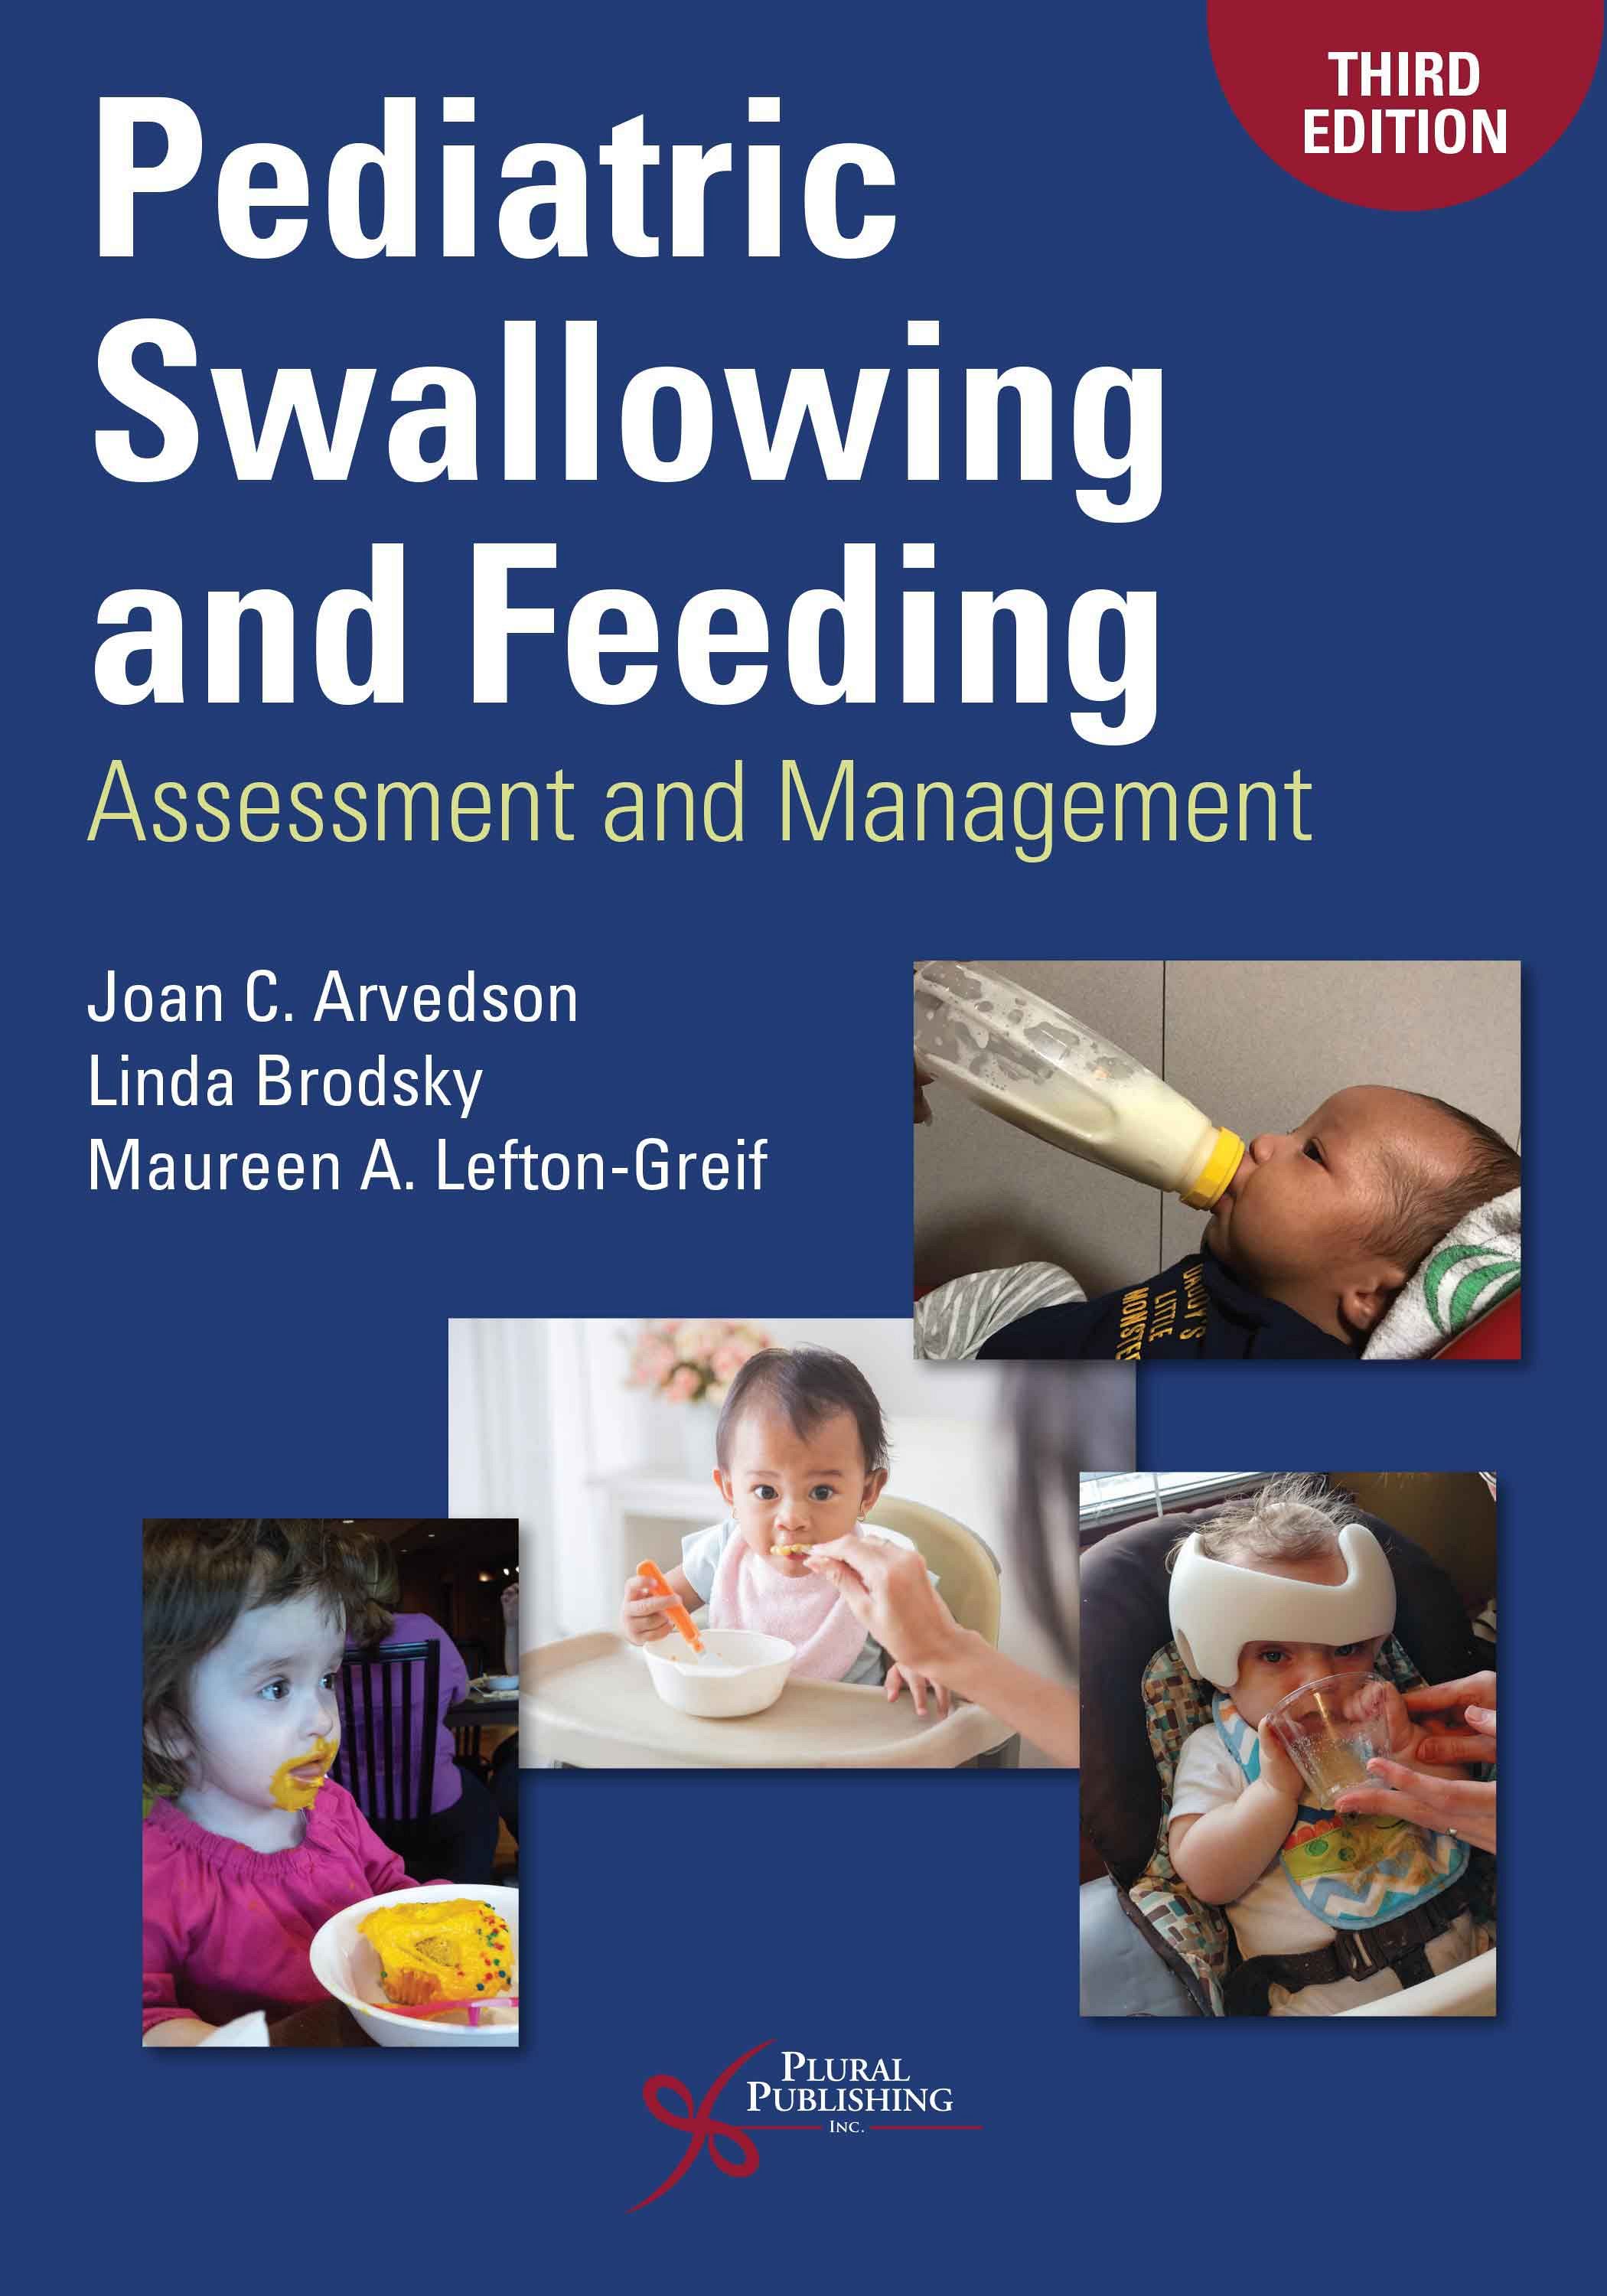 Pediatric Swallowing and Feeding: Assessment and Management, Third Edition